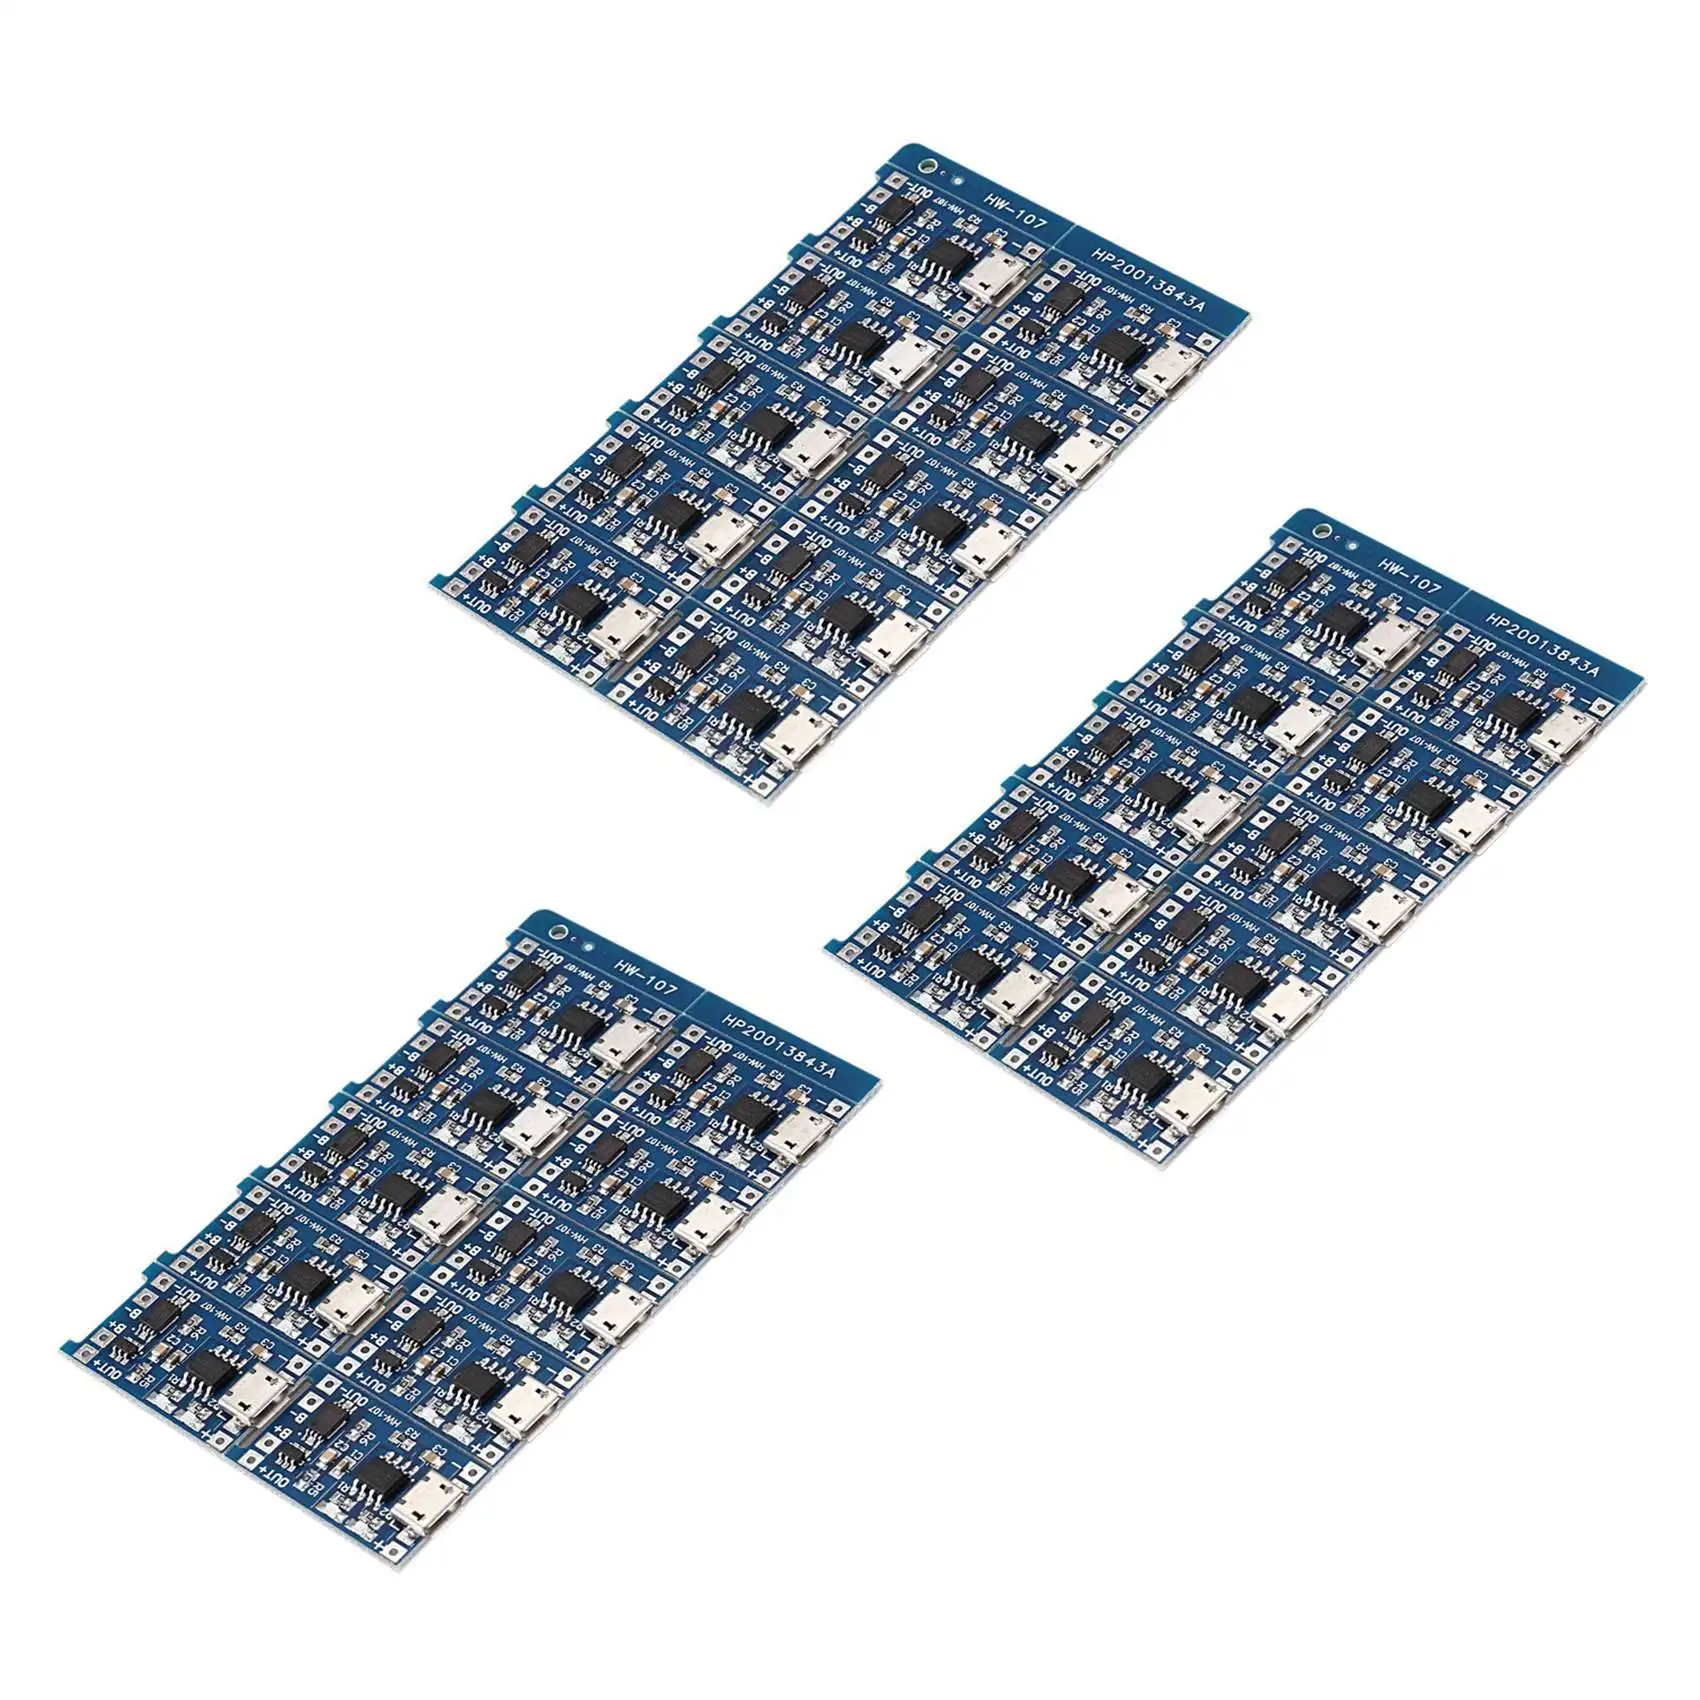 

30Pcs 5V Mini USB 1A 18650 TP4056 Lithium Battery Charging Board with Protection Charger Module